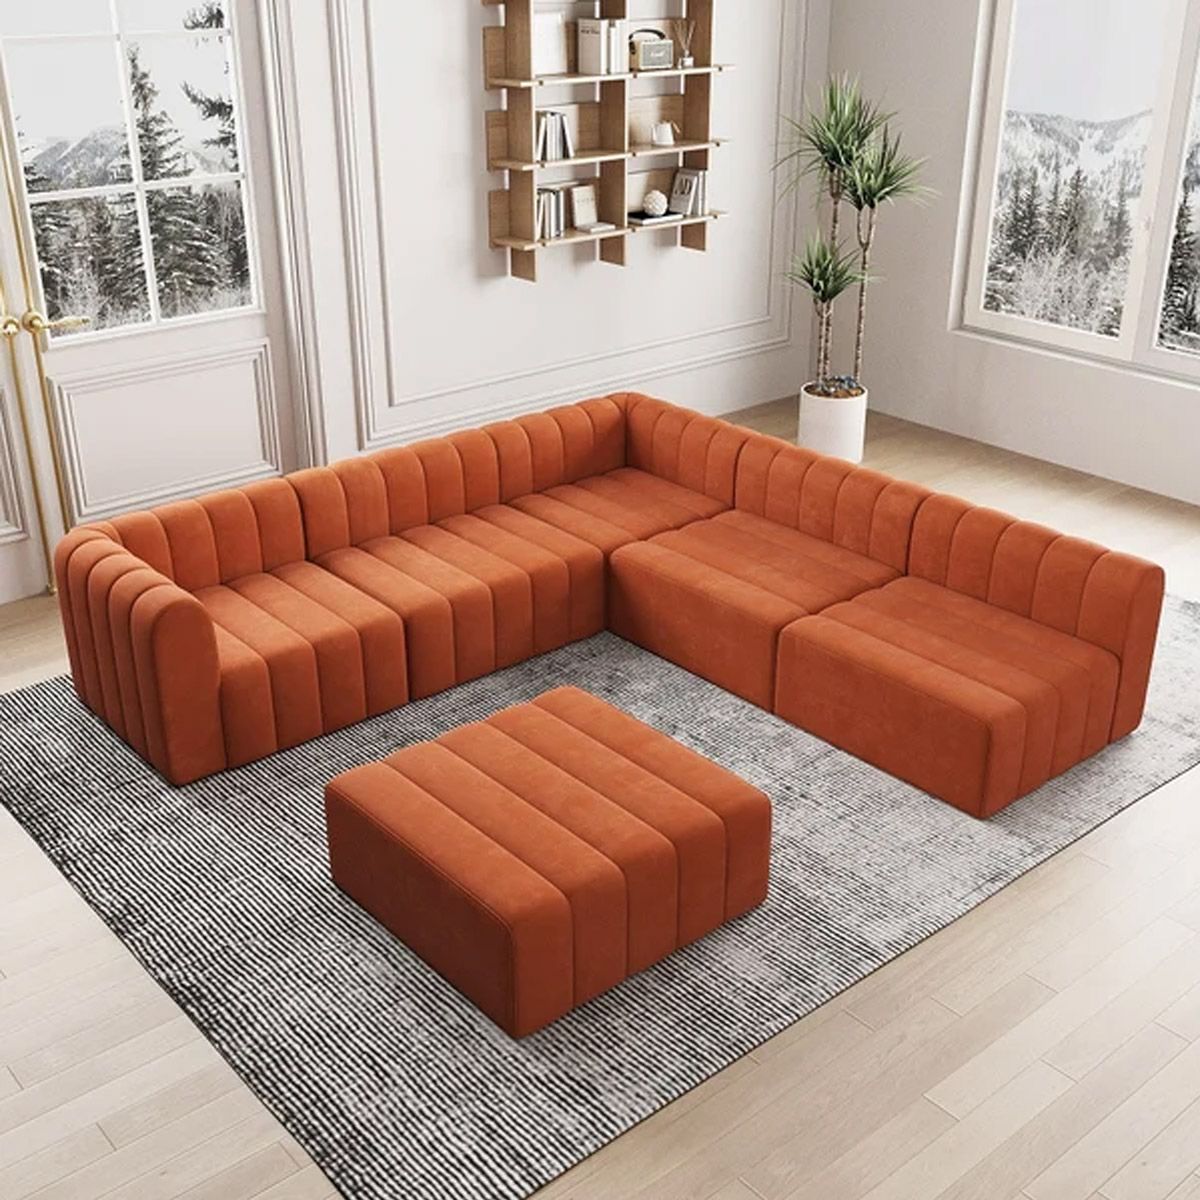 Chelsea Channel Velvet Modular Sectional Sofa Set Convertible 6 Seater Sofa  Orange From Aed 7749  Atoz Furniture Pertaining To Cream Velvet Modular Sectionals (View 15 of 15)